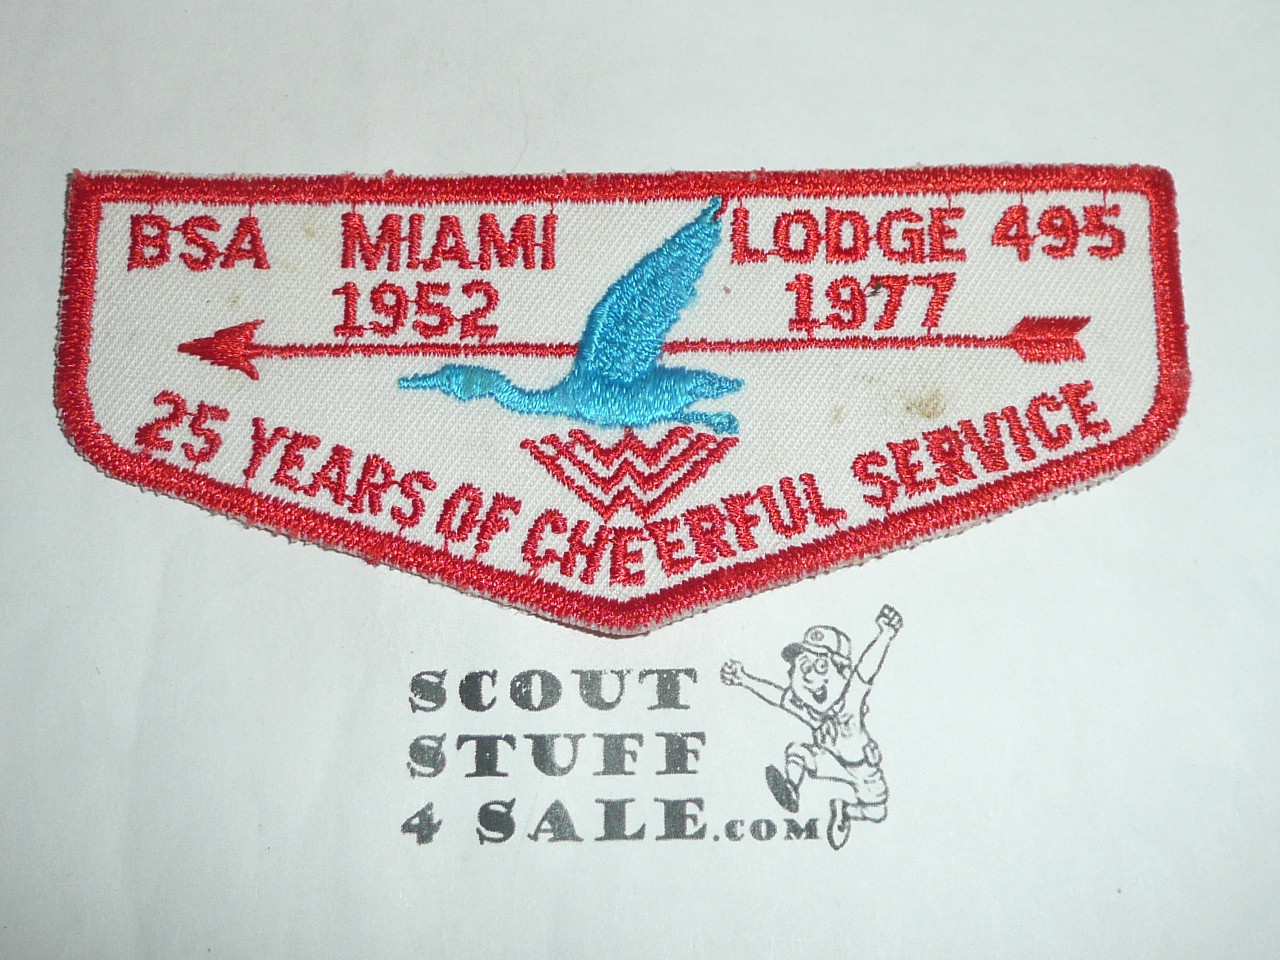 Order of the Arrow Lodge #495 Miami f3 25th Anniversary Flap Patch, a little dirt